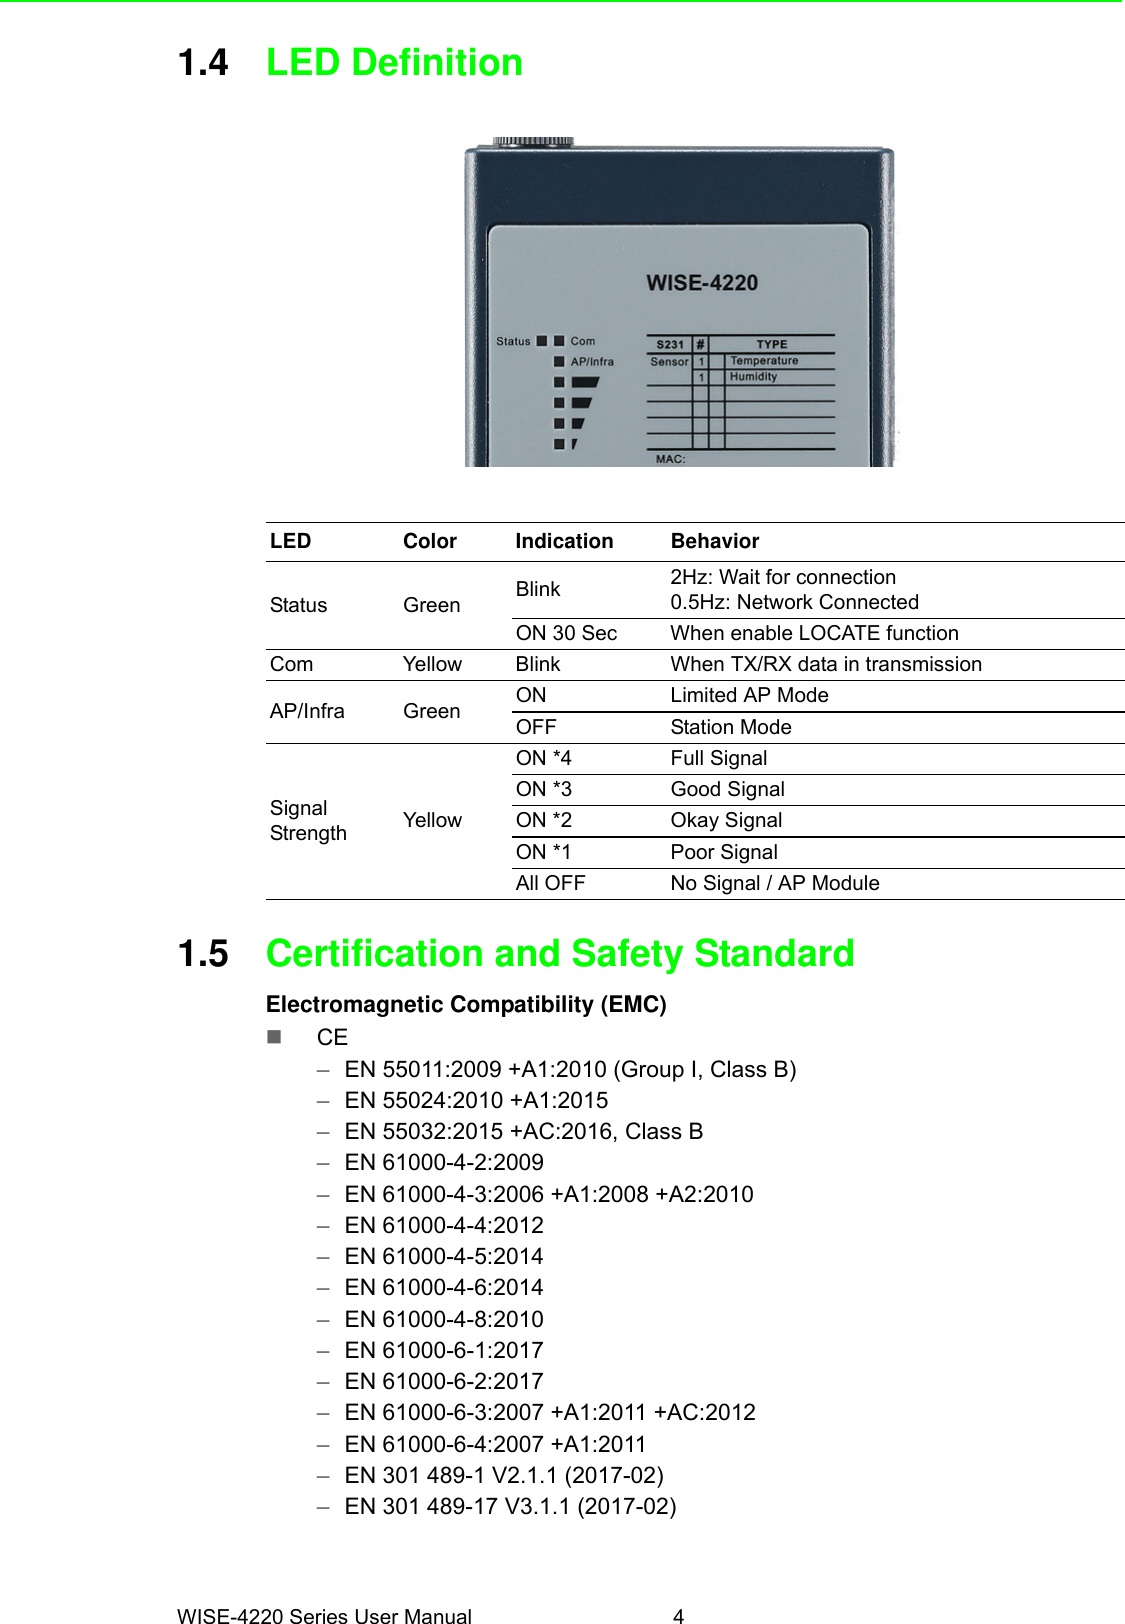 WISE-4220 Series User Manual 41.4 LED Definition1.5 Certification and Safety StandardElectromagnetic Compatibility (EMC)CE–EN 55011:2009 +A1:2010 (Group I, Class B)–EN 55024:2010 +A1:2015–EN 55032:2015 +AC:2016, Class B–EN 61000-4-2:2009–EN 61000-4-3:2006 +A1:2008 +A2:2010–EN 61000-4-4:2012–EN 61000-4-5:2014–EN 61000-4-6:2014–EN 61000-4-8:2010–EN 61000-6-1:2017–EN 61000-6-2:2017–EN 61000-6-3:2007 +A1:2011 +AC:2012–EN 61000-6-4:2007 +A1:2011–EN 301 489-1 V2.1.1 (2017-02)–EN 301 489-17 V3.1.1 (2017-02)LED Color Indication BehaviorStatus Green Blink 2Hz: Wait for connection0.5Hz: Network ConnectedON 30 Sec When enable LOCATE functionCom Yellow Blink When TX/RX data in transmissionAP/Infra Green ON Limited AP ModeOFF Station ModeSignal Strength YellowON *4 Full SignalON *3 Good SignalON *2 Okay SignalON *1 Poor SignalAll OFF No Signal / AP Module